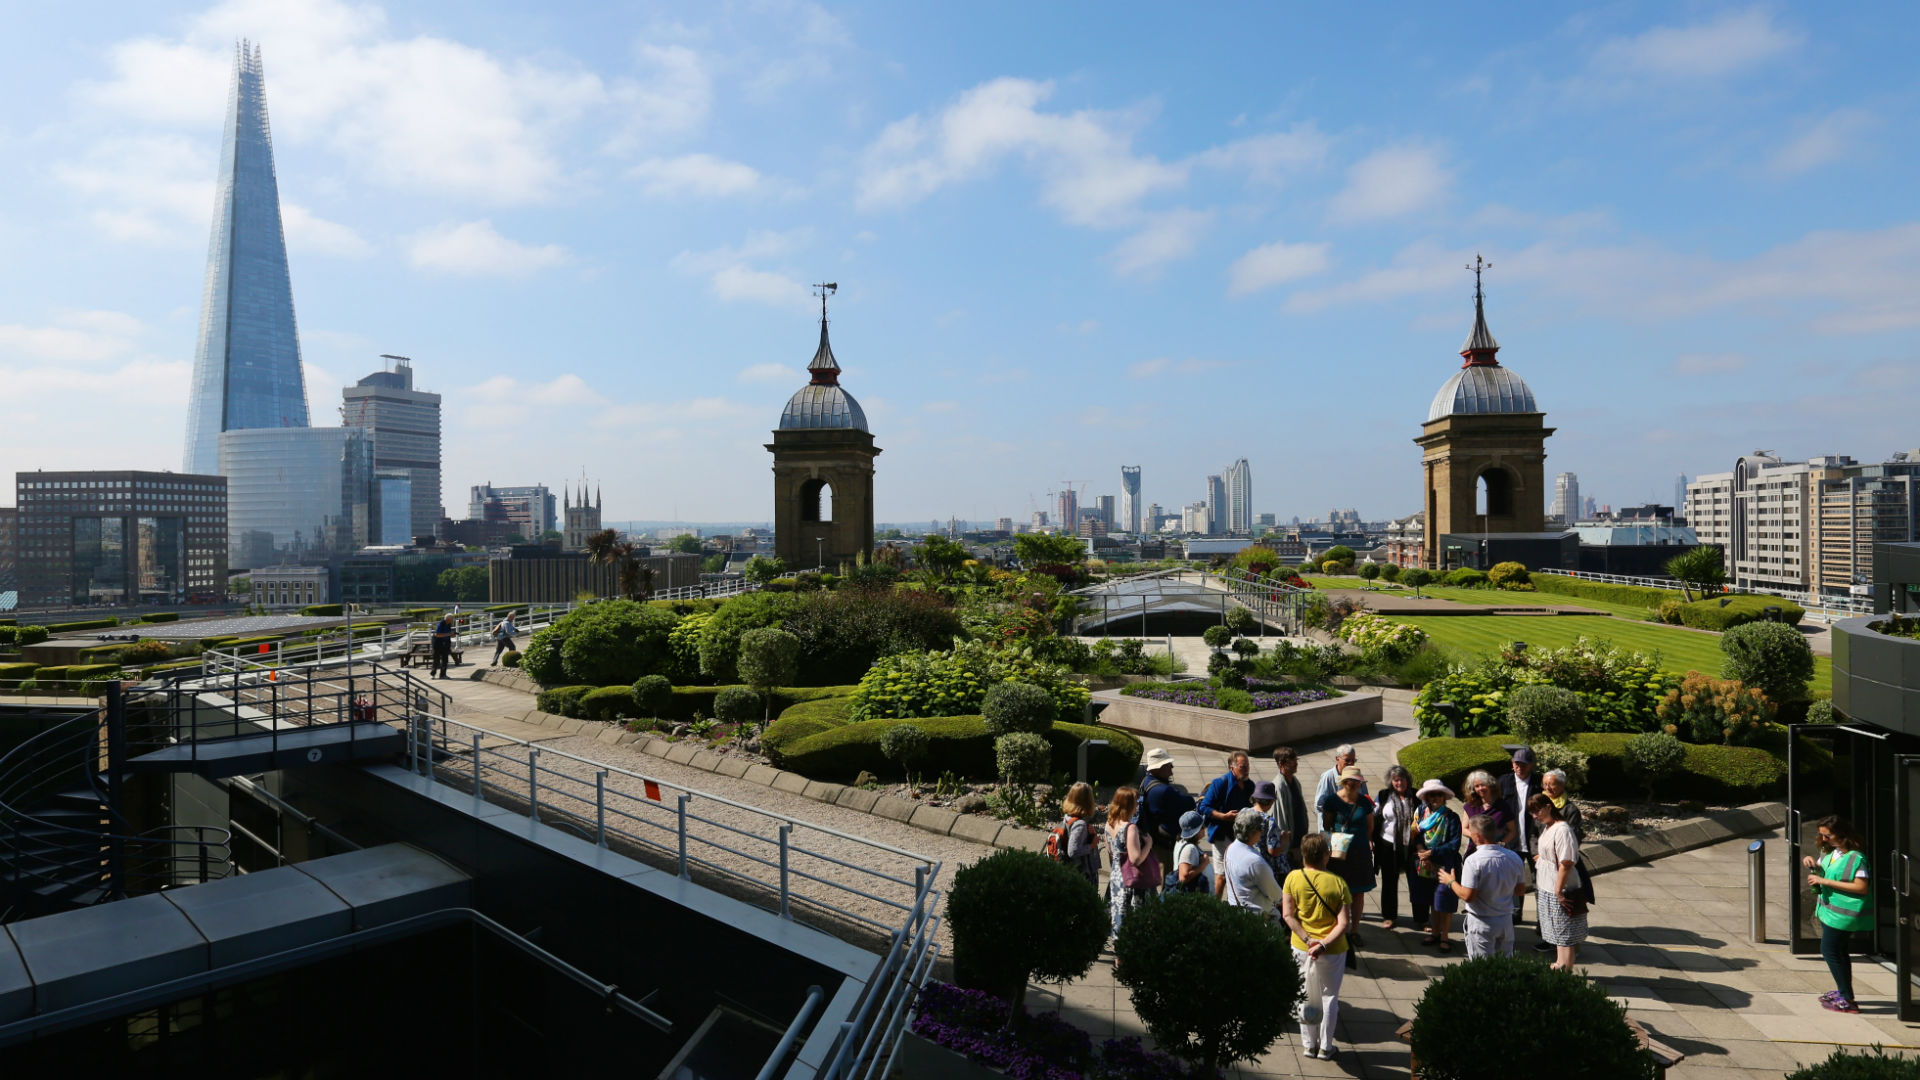 A roof garden on a sunny day with London's panorama, featuring The Shard, in the background. 